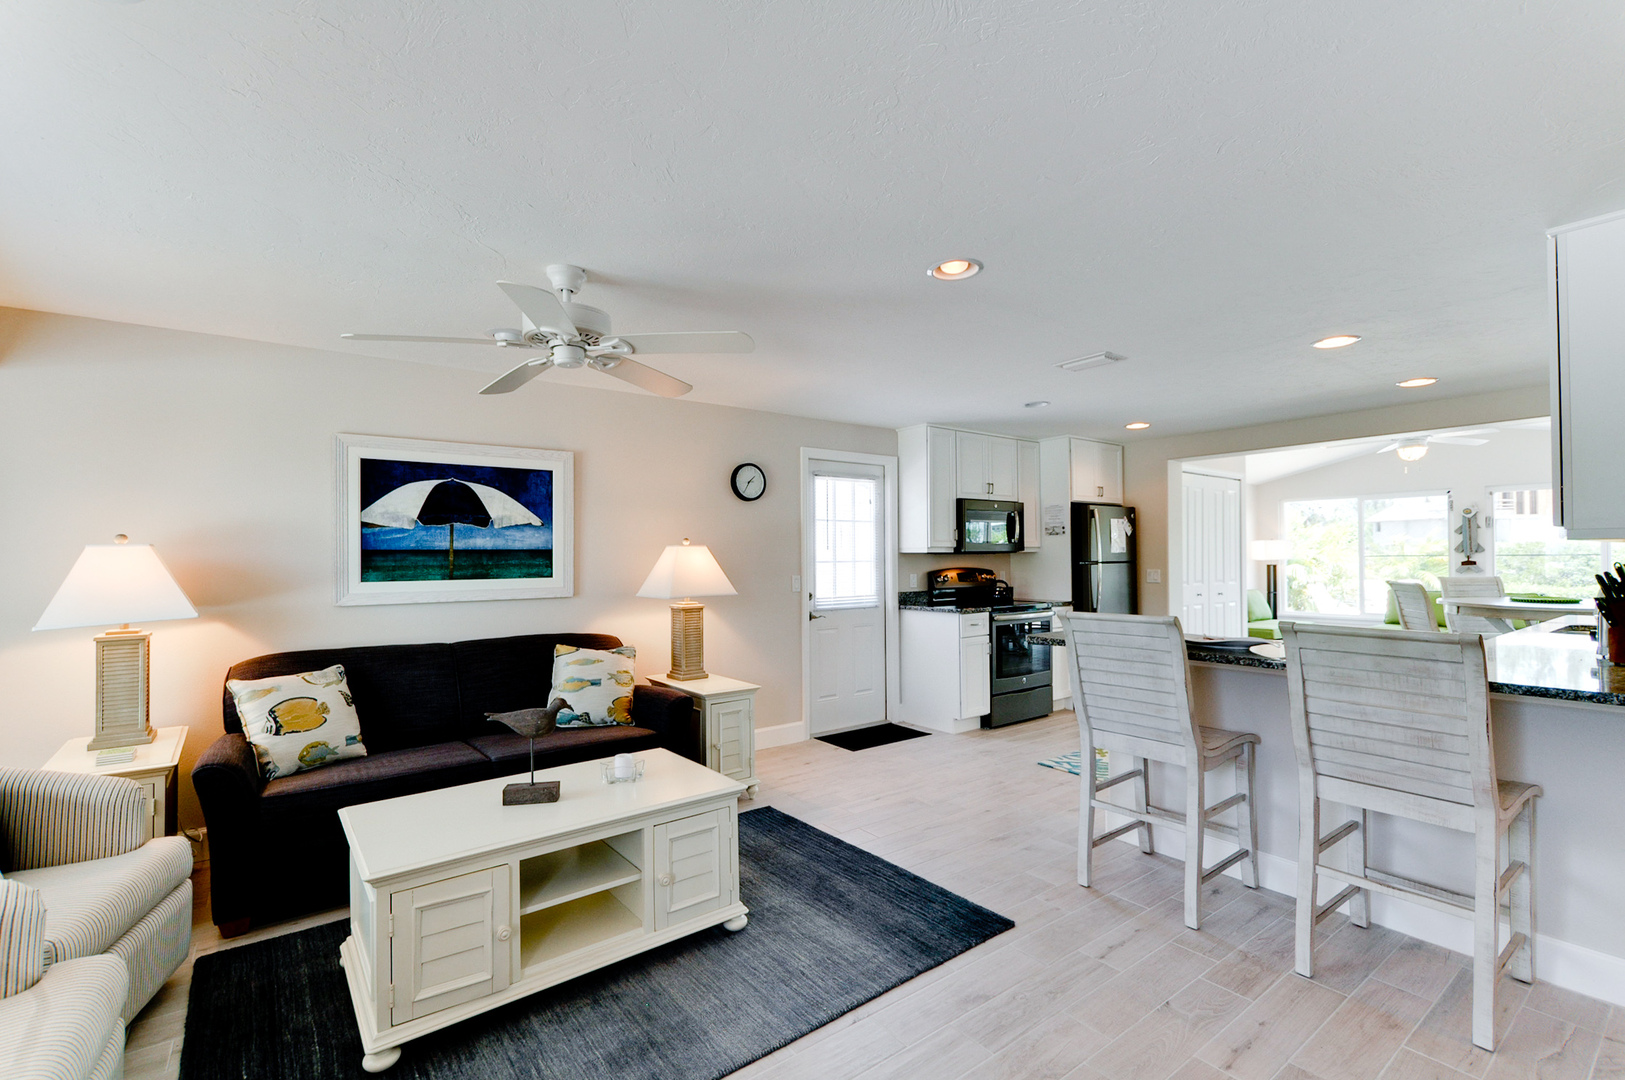 2 Pina Colada's B open concept view with living room, kitchen & dining table